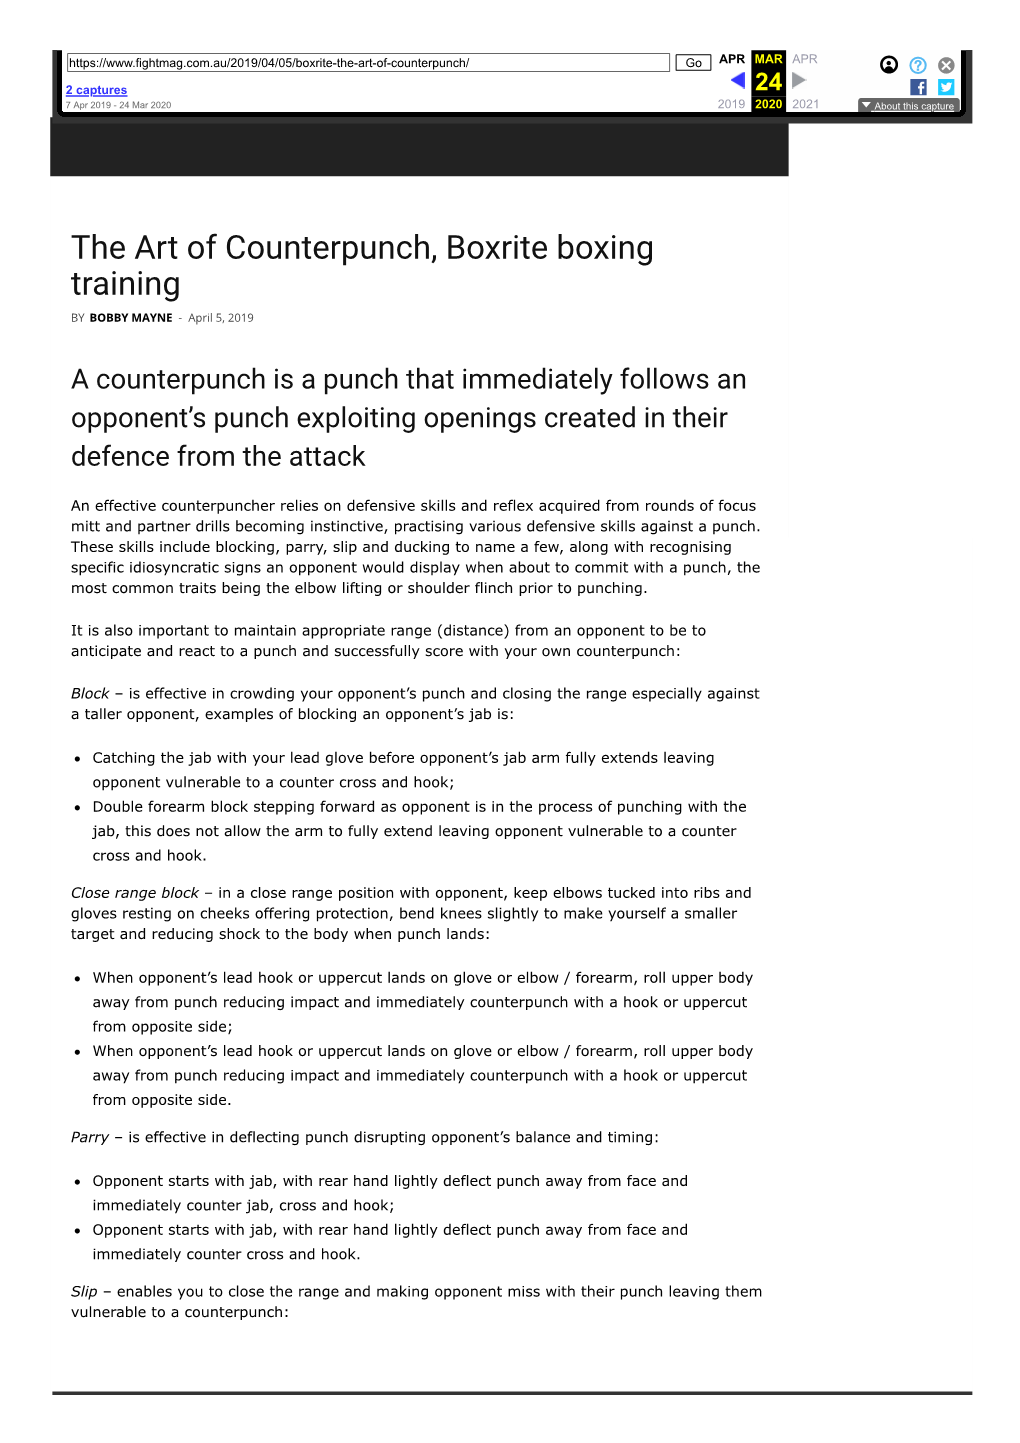 The Art of Counterpunch, Boxrite Boxing Training by BOBBY MAYNE - April 5, 2019